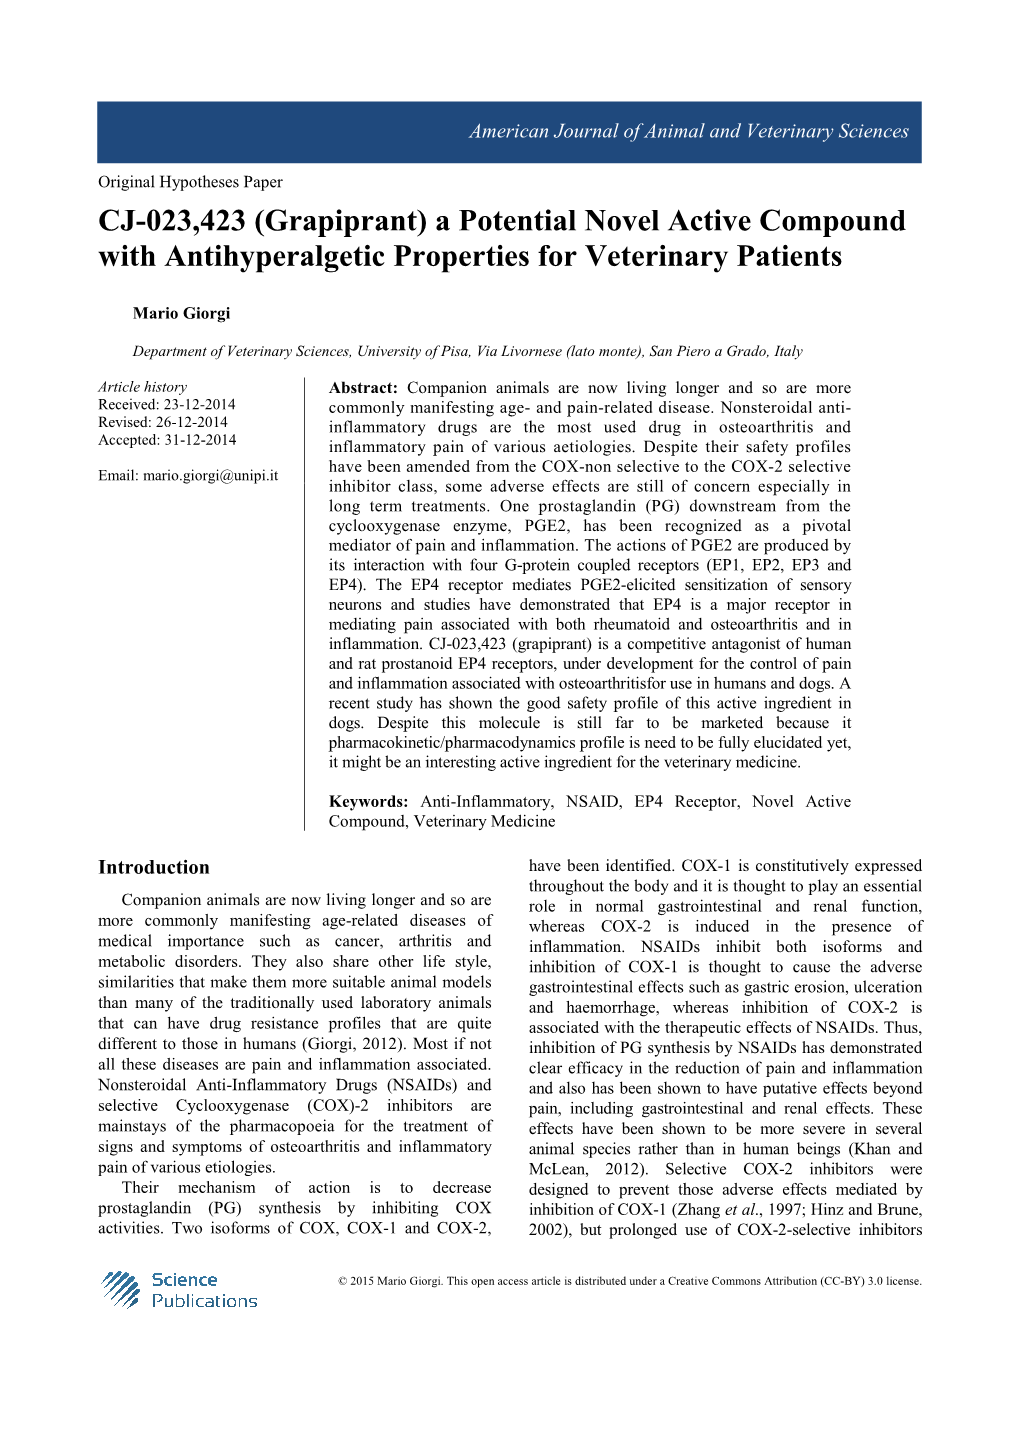 CJ-023,423 (Grapiprant) a Potential Novel Active Compound with Antihyperalgetic Properties for Veterinary Patients